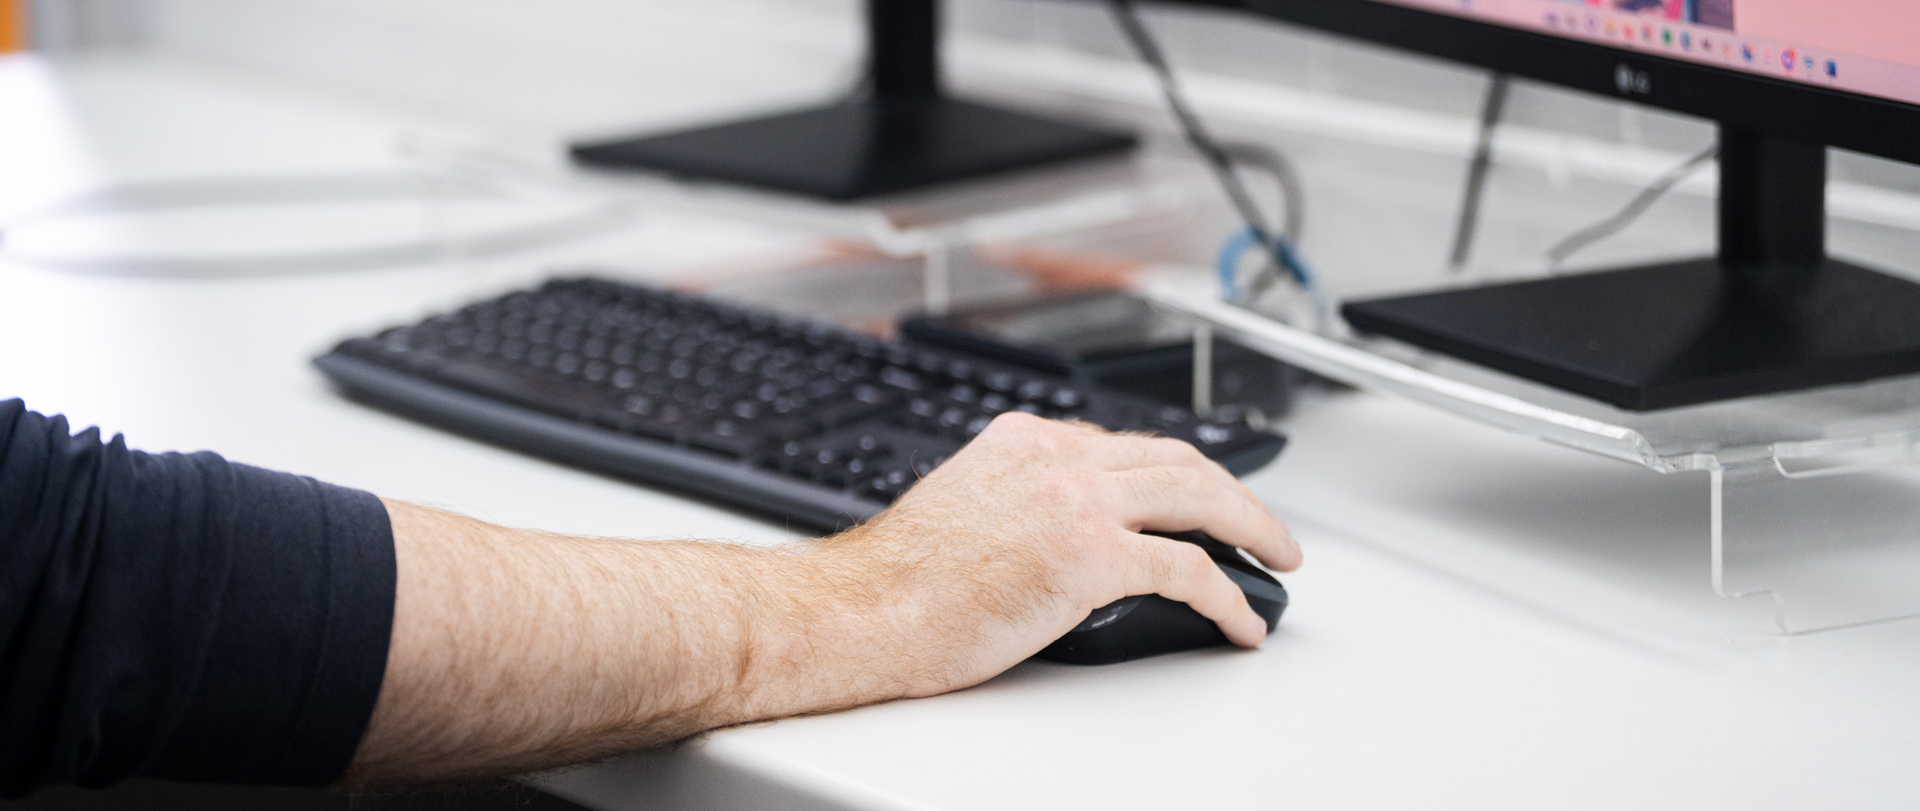 A man's hand using a mouse connected to a desktop computer